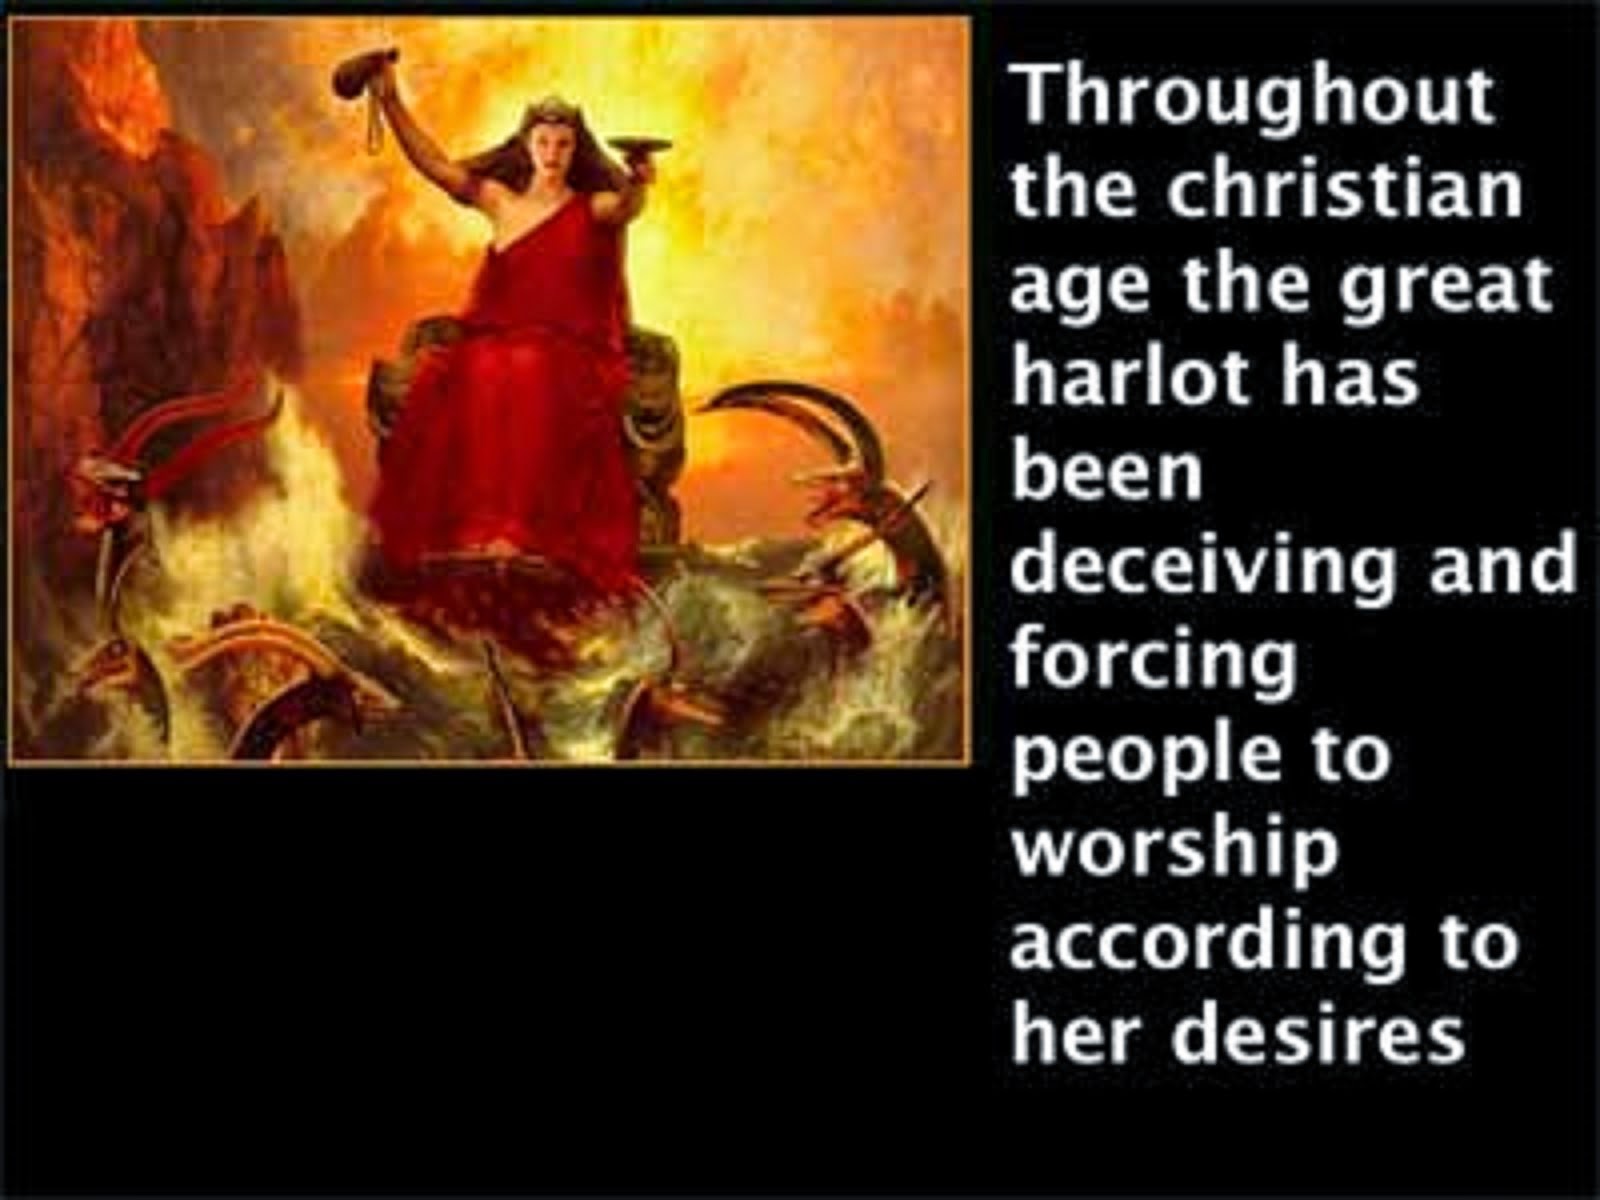 THE GREAT HARLOT HAS BEEN DECEIVING AN D FORCING PEOPLE TO WORSHIP TO HER DESIRES